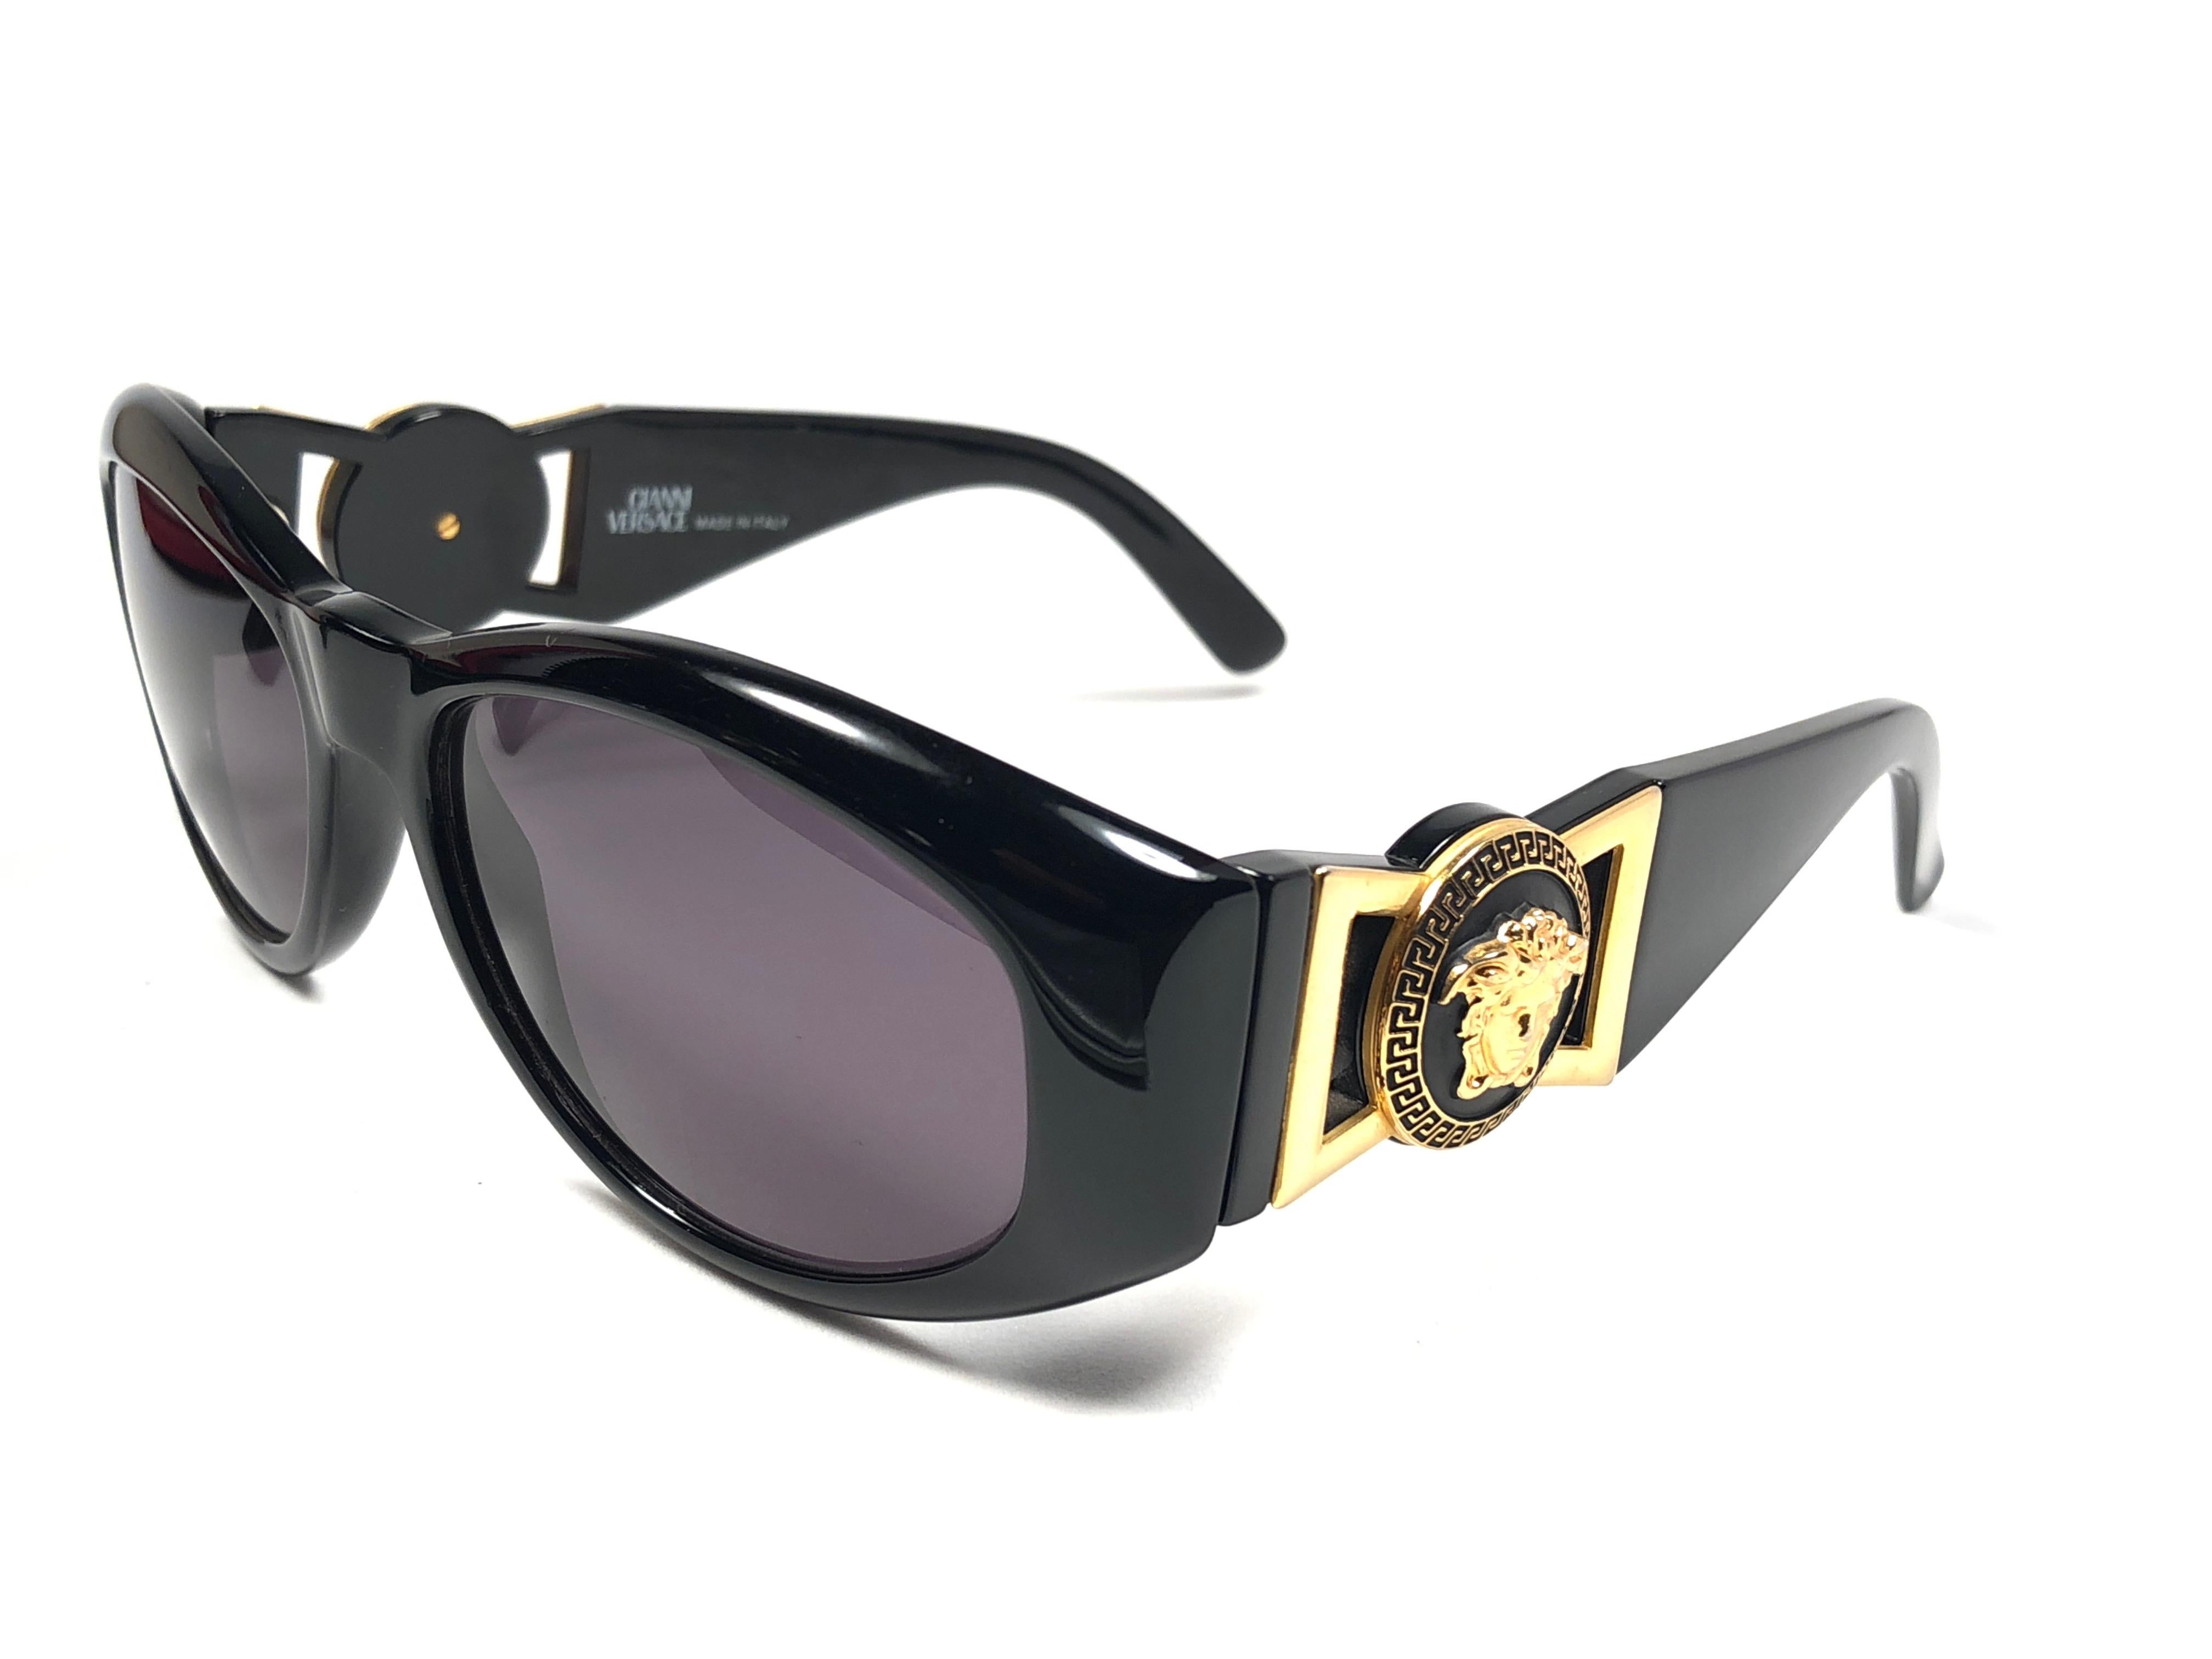 New Vintage Gianni Versace medium BLACK with gold accents frame with medium grey lenses.

New never worn or displayed. Comes with its original Gianni Versace sleeve and cleaning cloth.
This pair could show minor sign of wear due to storage.

Made in